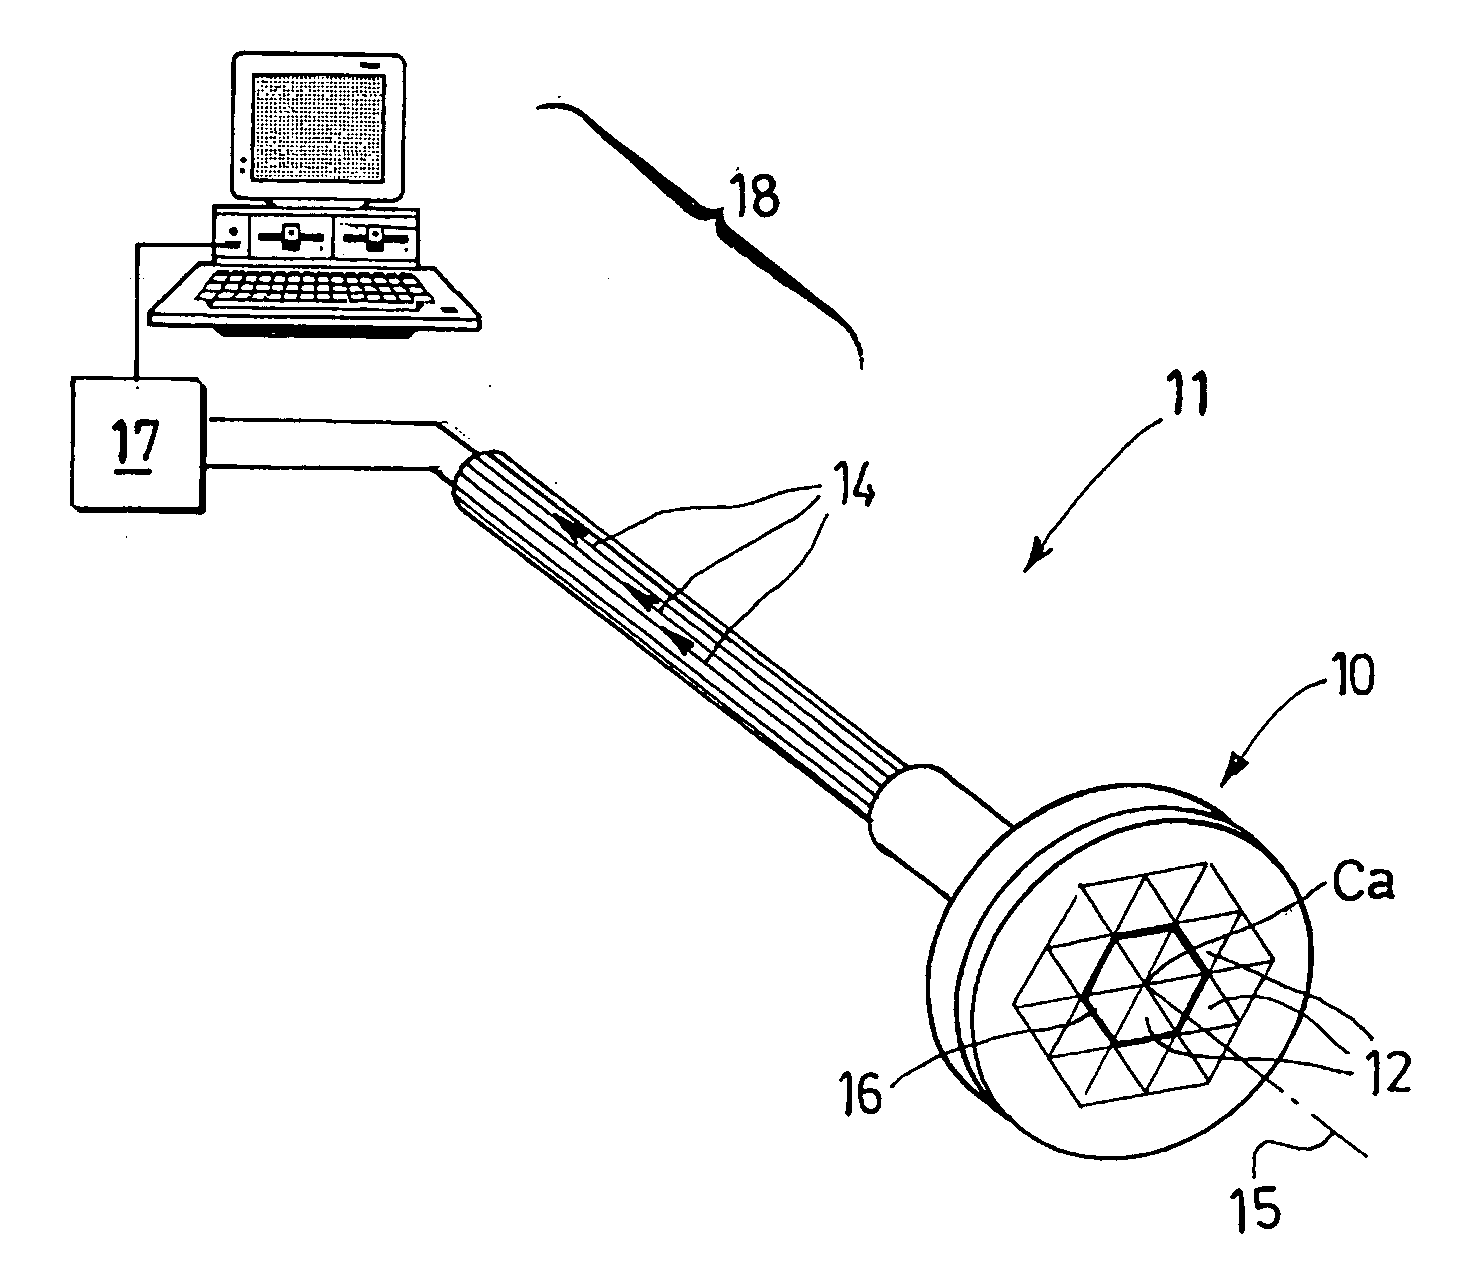 Method for measuring the viscoelastic properties of biological tissue employing an ultrasonic transducer